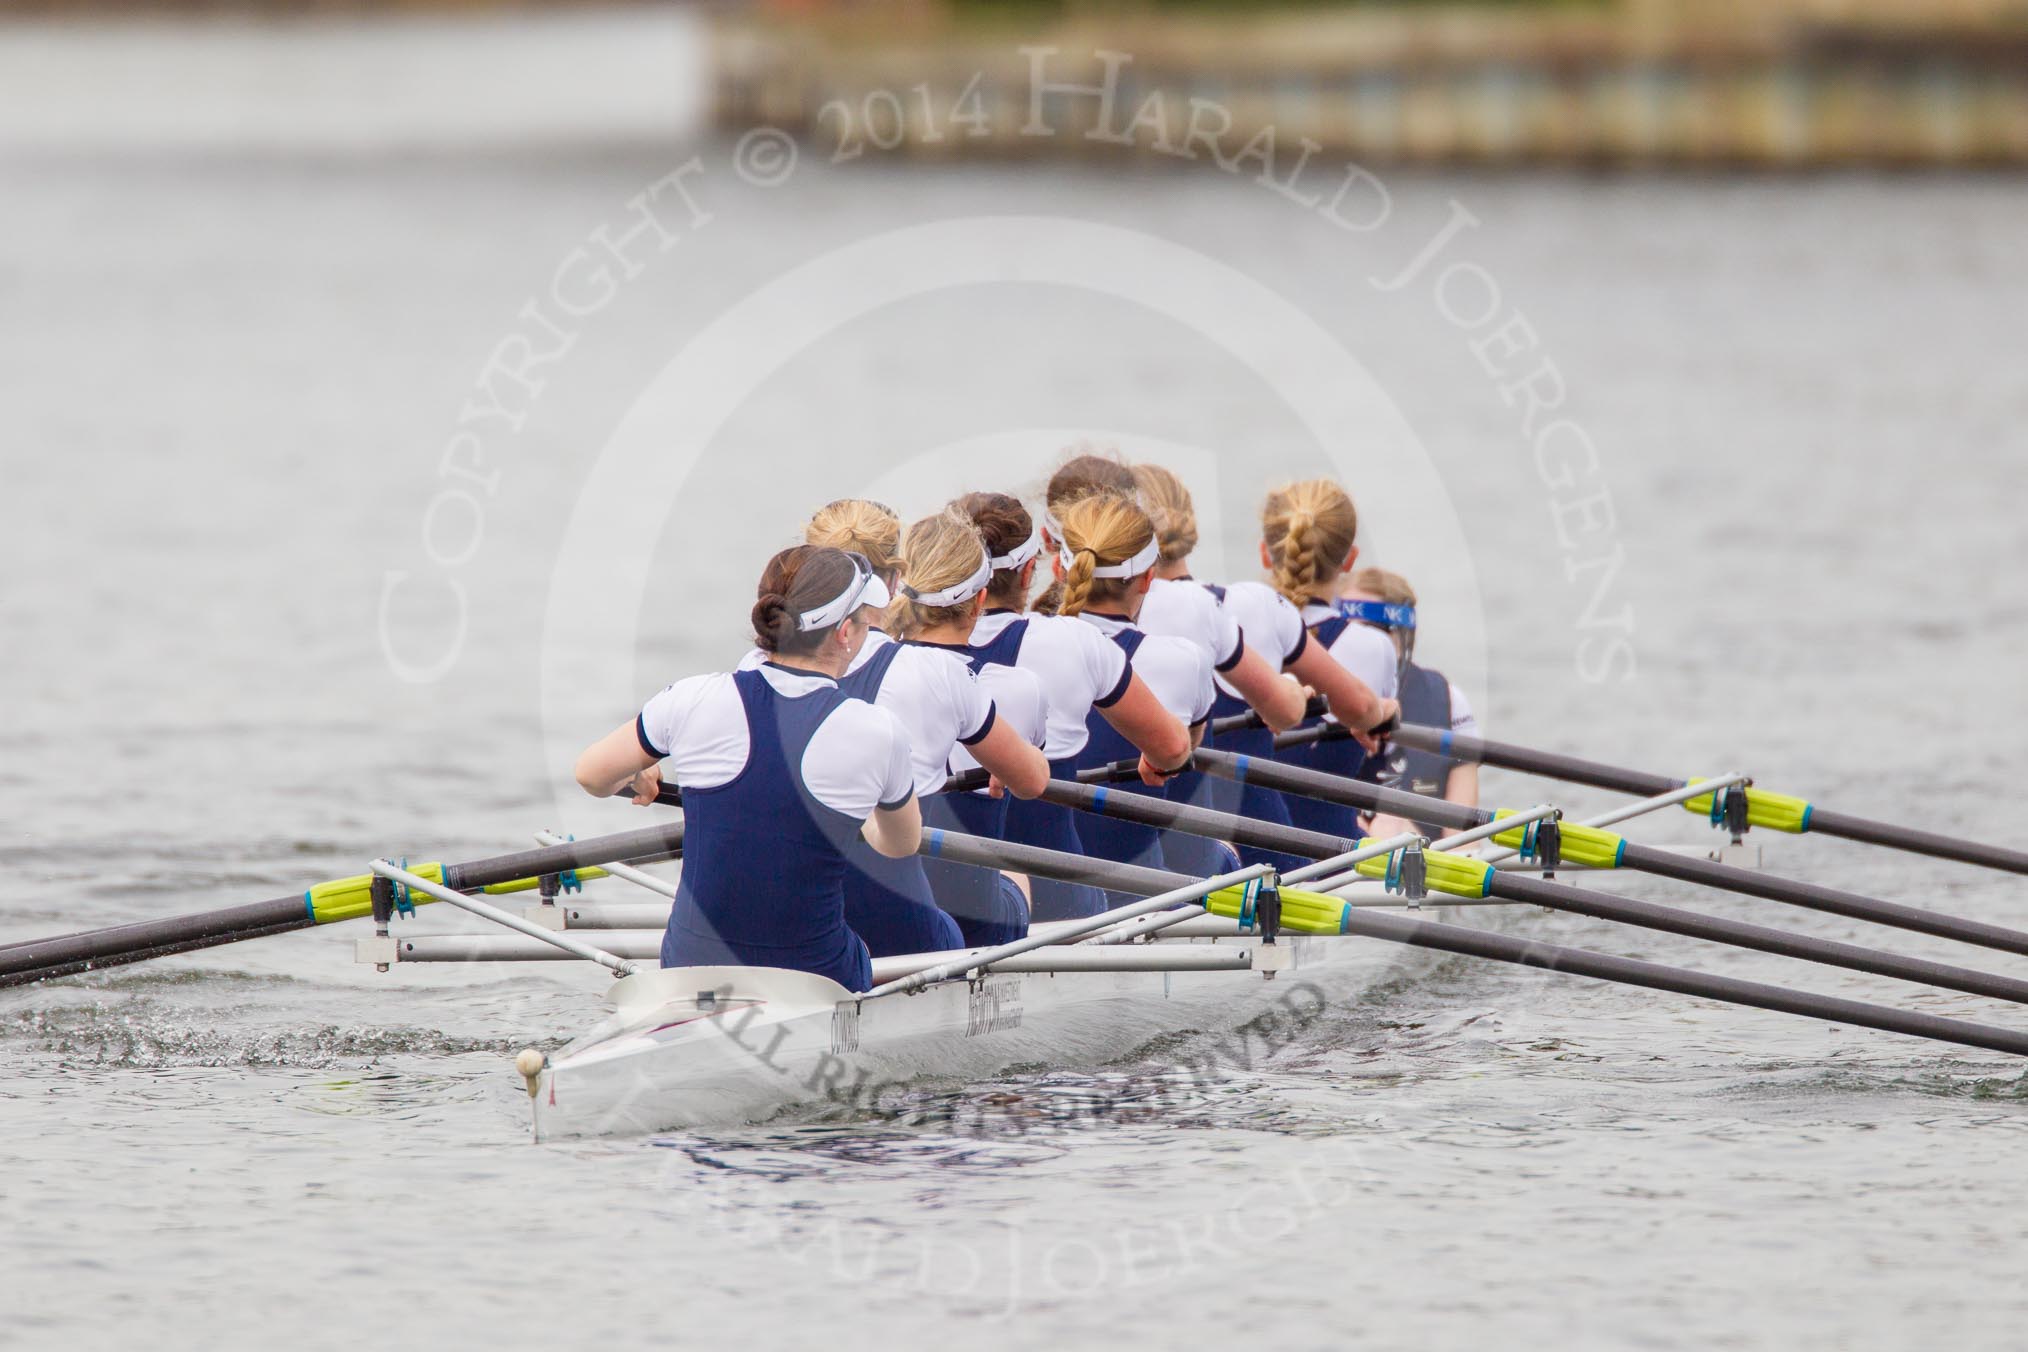 The Women's Boat Race and Henley Boat Races 2014: After winning the Newton Women's Boat Race, the Oxford crew is rowing back to Henley..
River Thames,
Henley-on-Thames,
Buckinghamshire,
United Kingdom,
on 30 March 2014 at 15:21, image #328